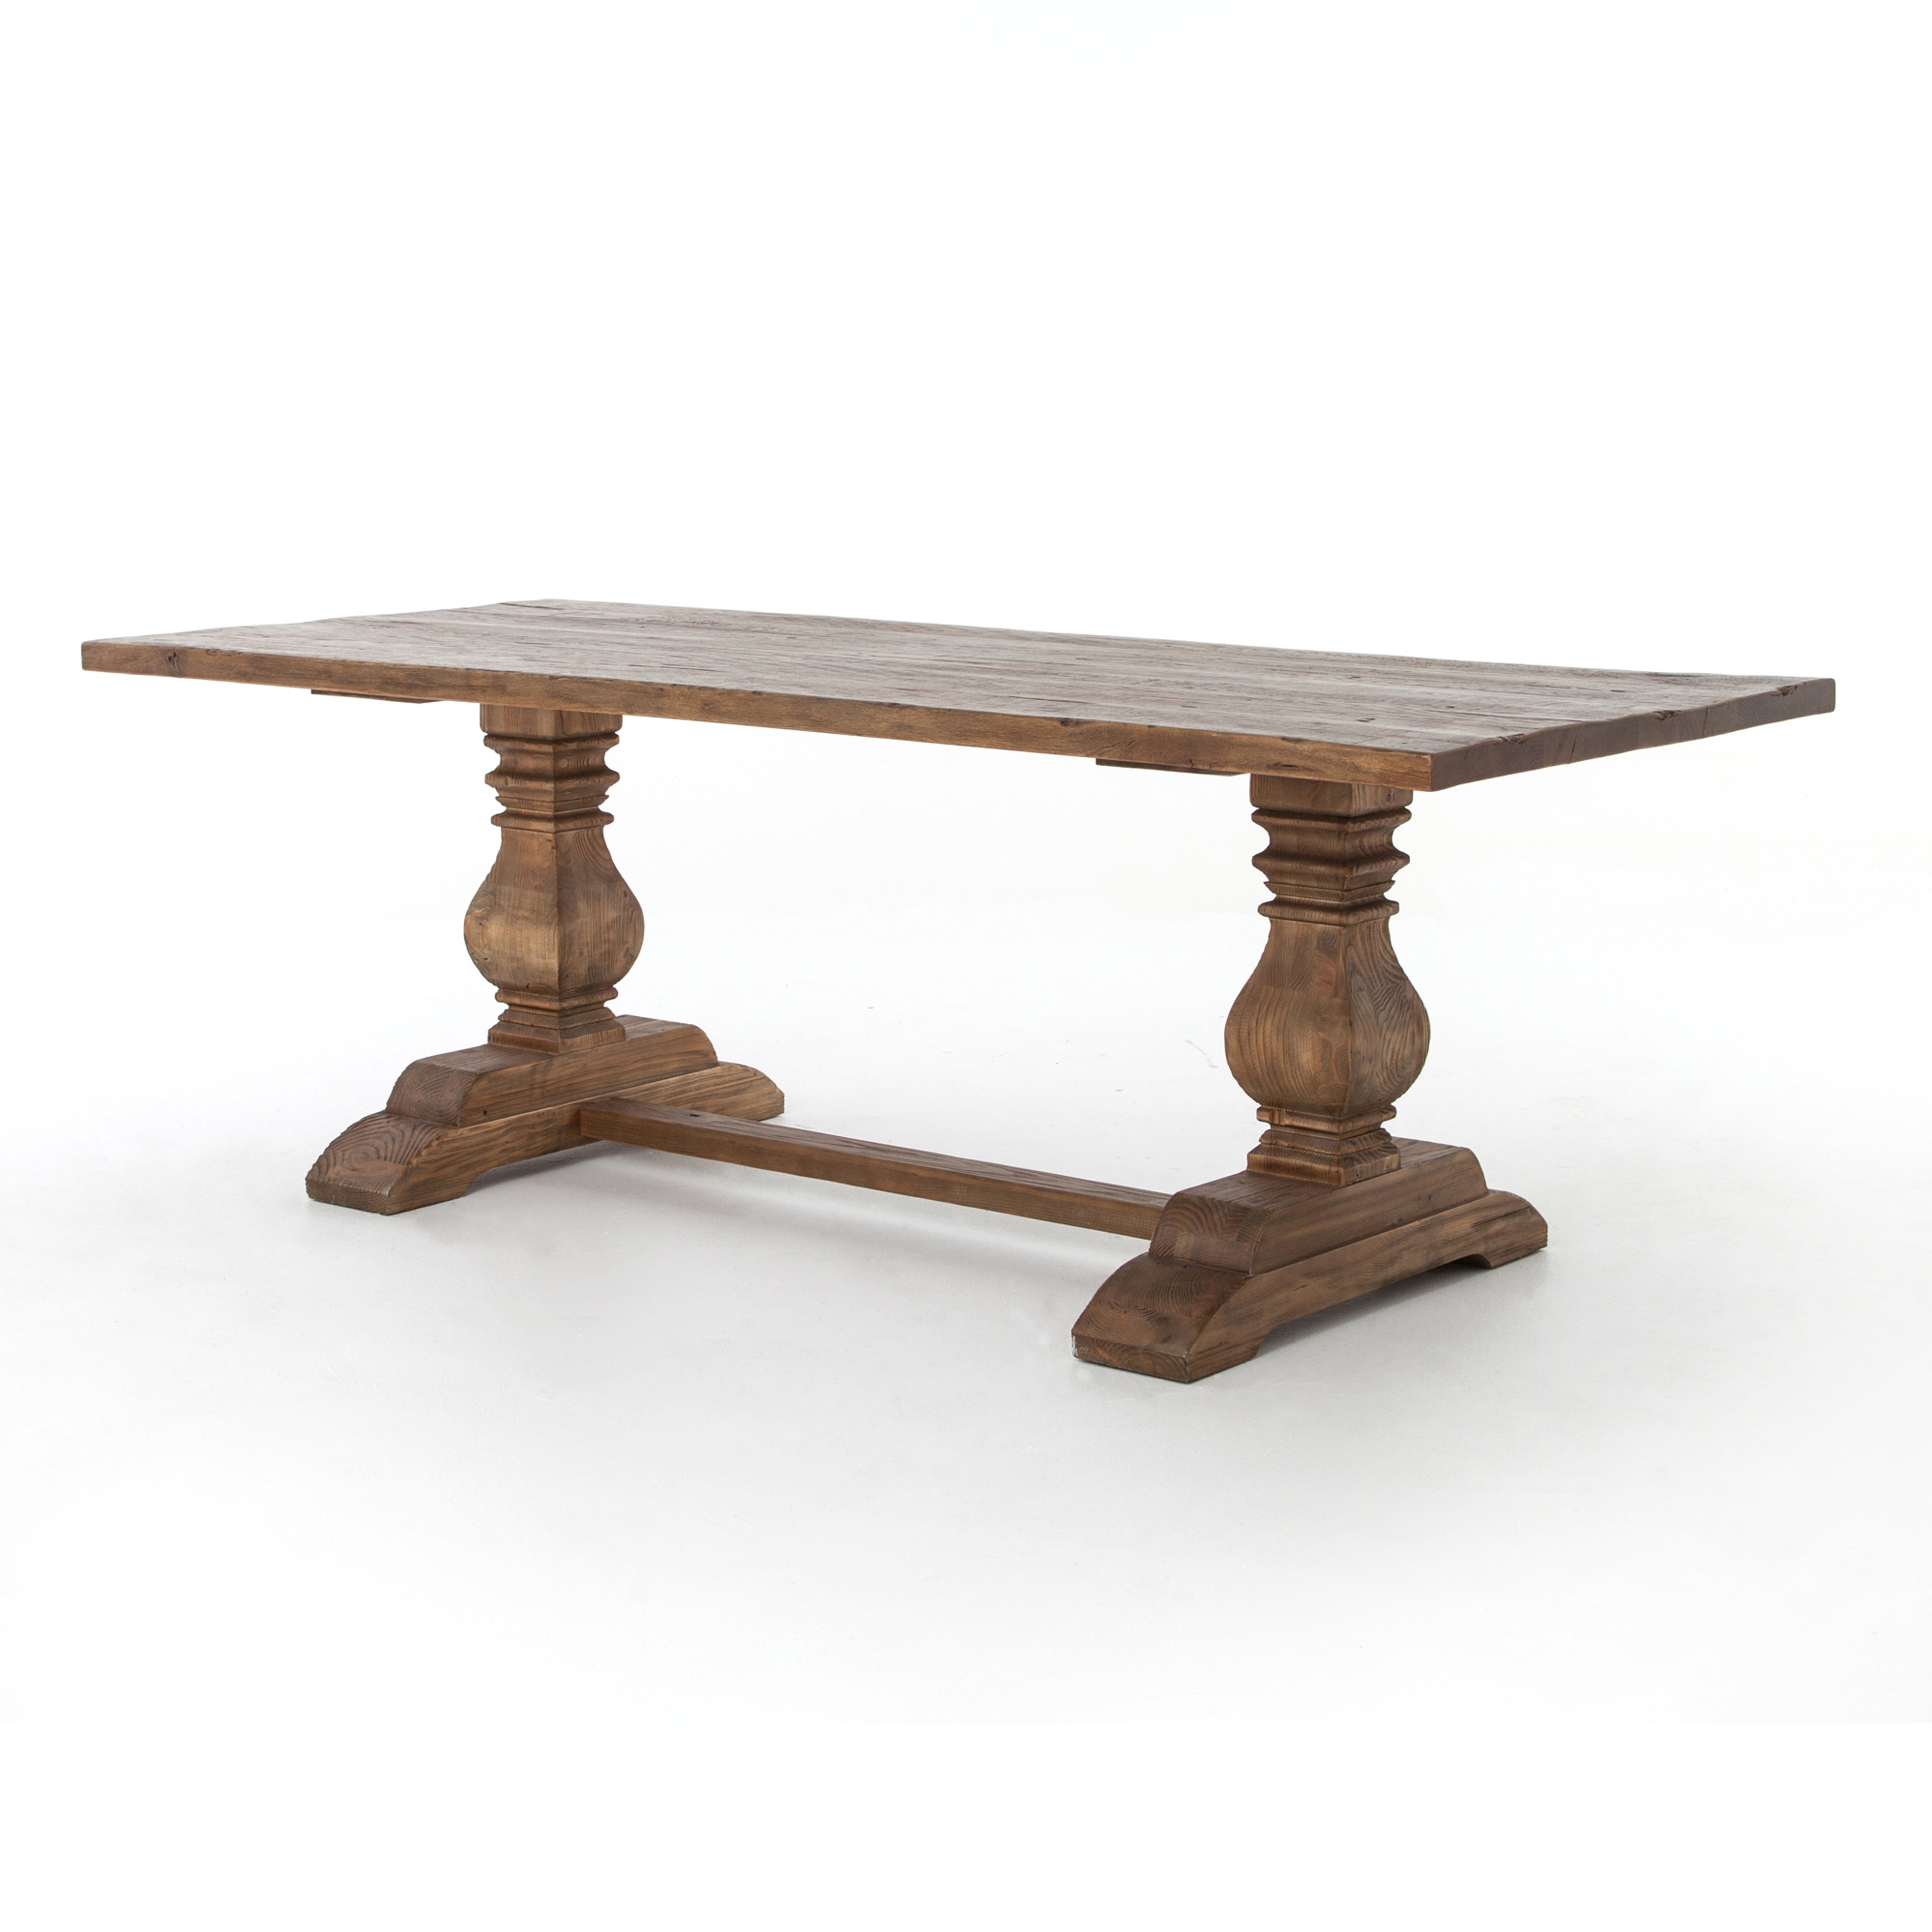 traditional wooden trestle base dining table Items range from $2899.00 to $3299.00